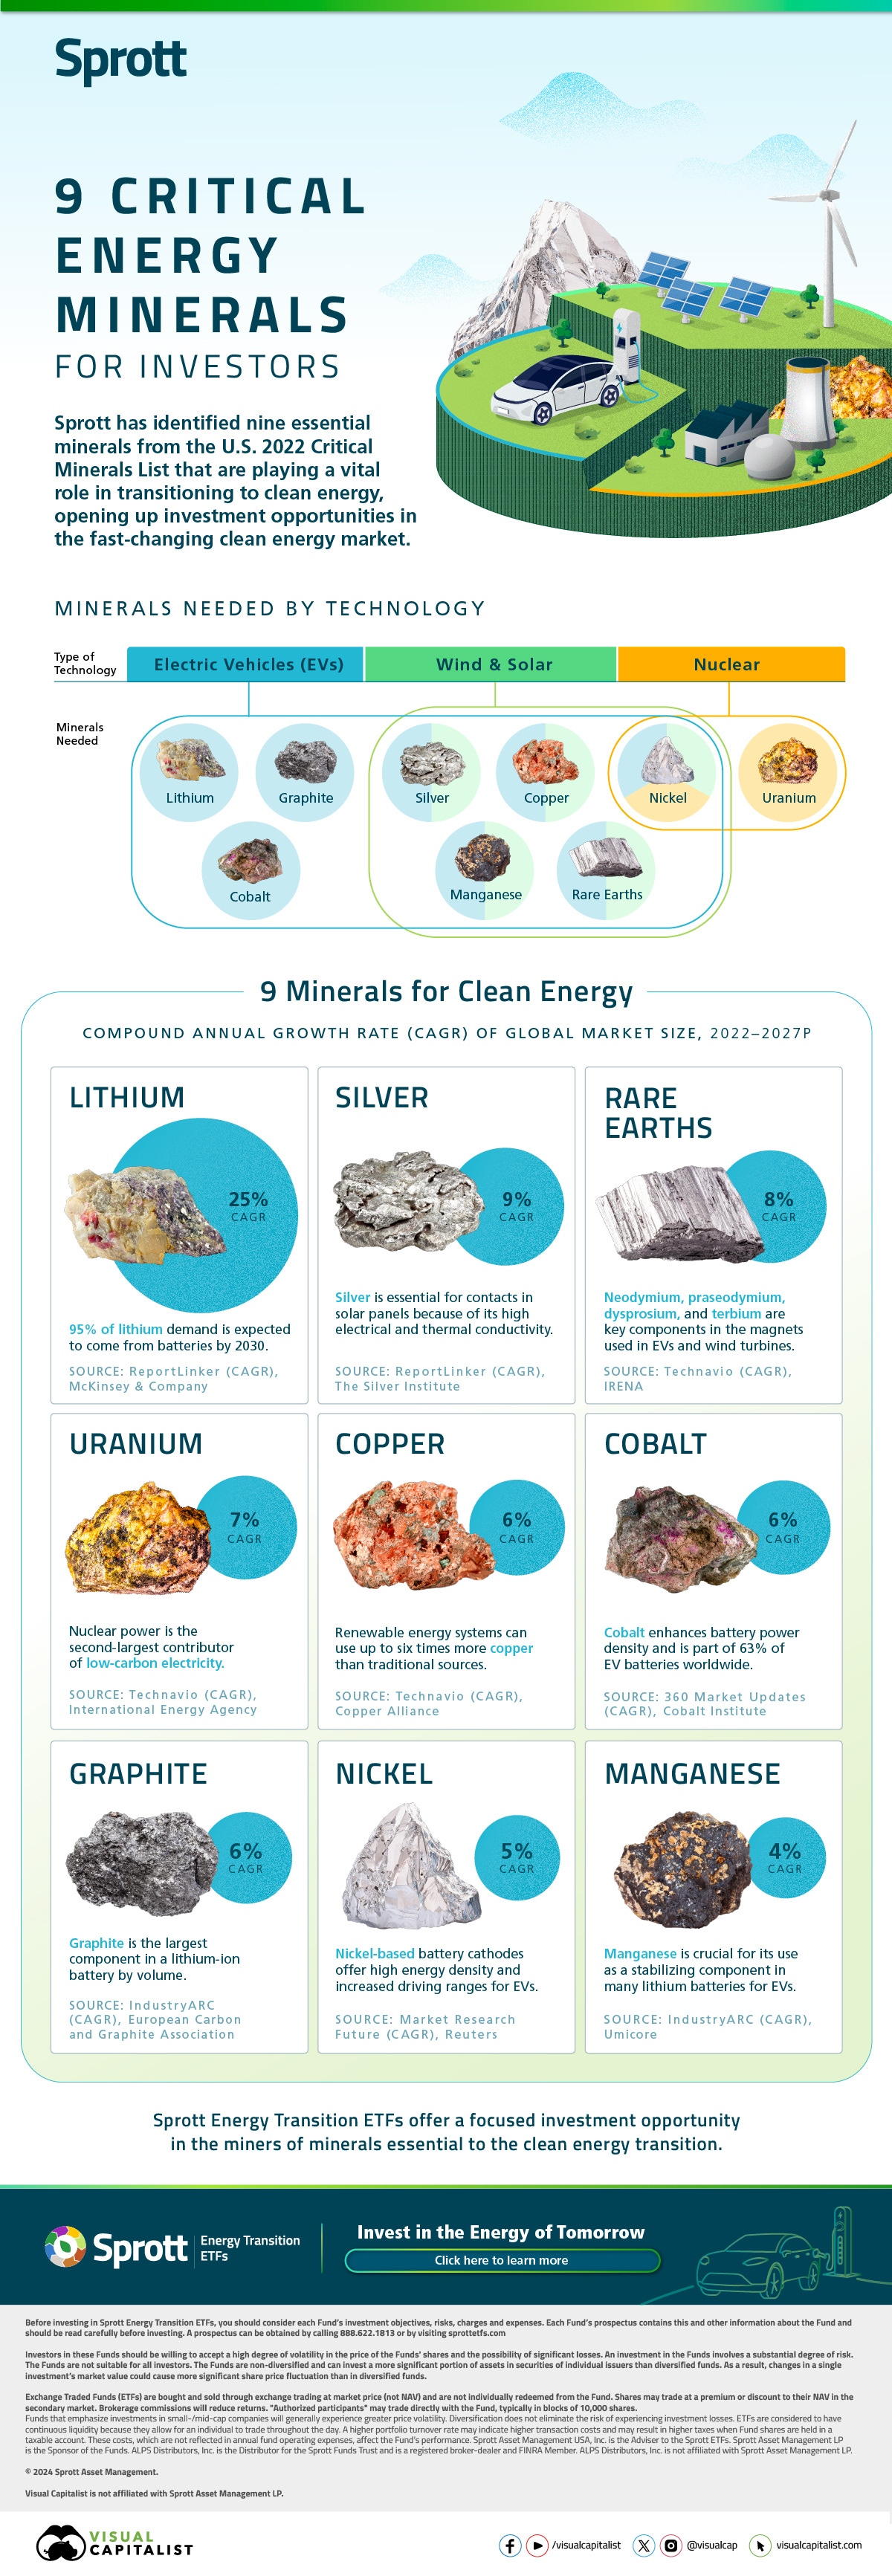 A Venn diagram showing U.S. Critical Minerals that are essential for clean energy technologies and a bubble diagram showing their projected compound annual growth rates between 2022–2027. Lithium, silver, and rare earth minerals will have the highest growth of global market size.